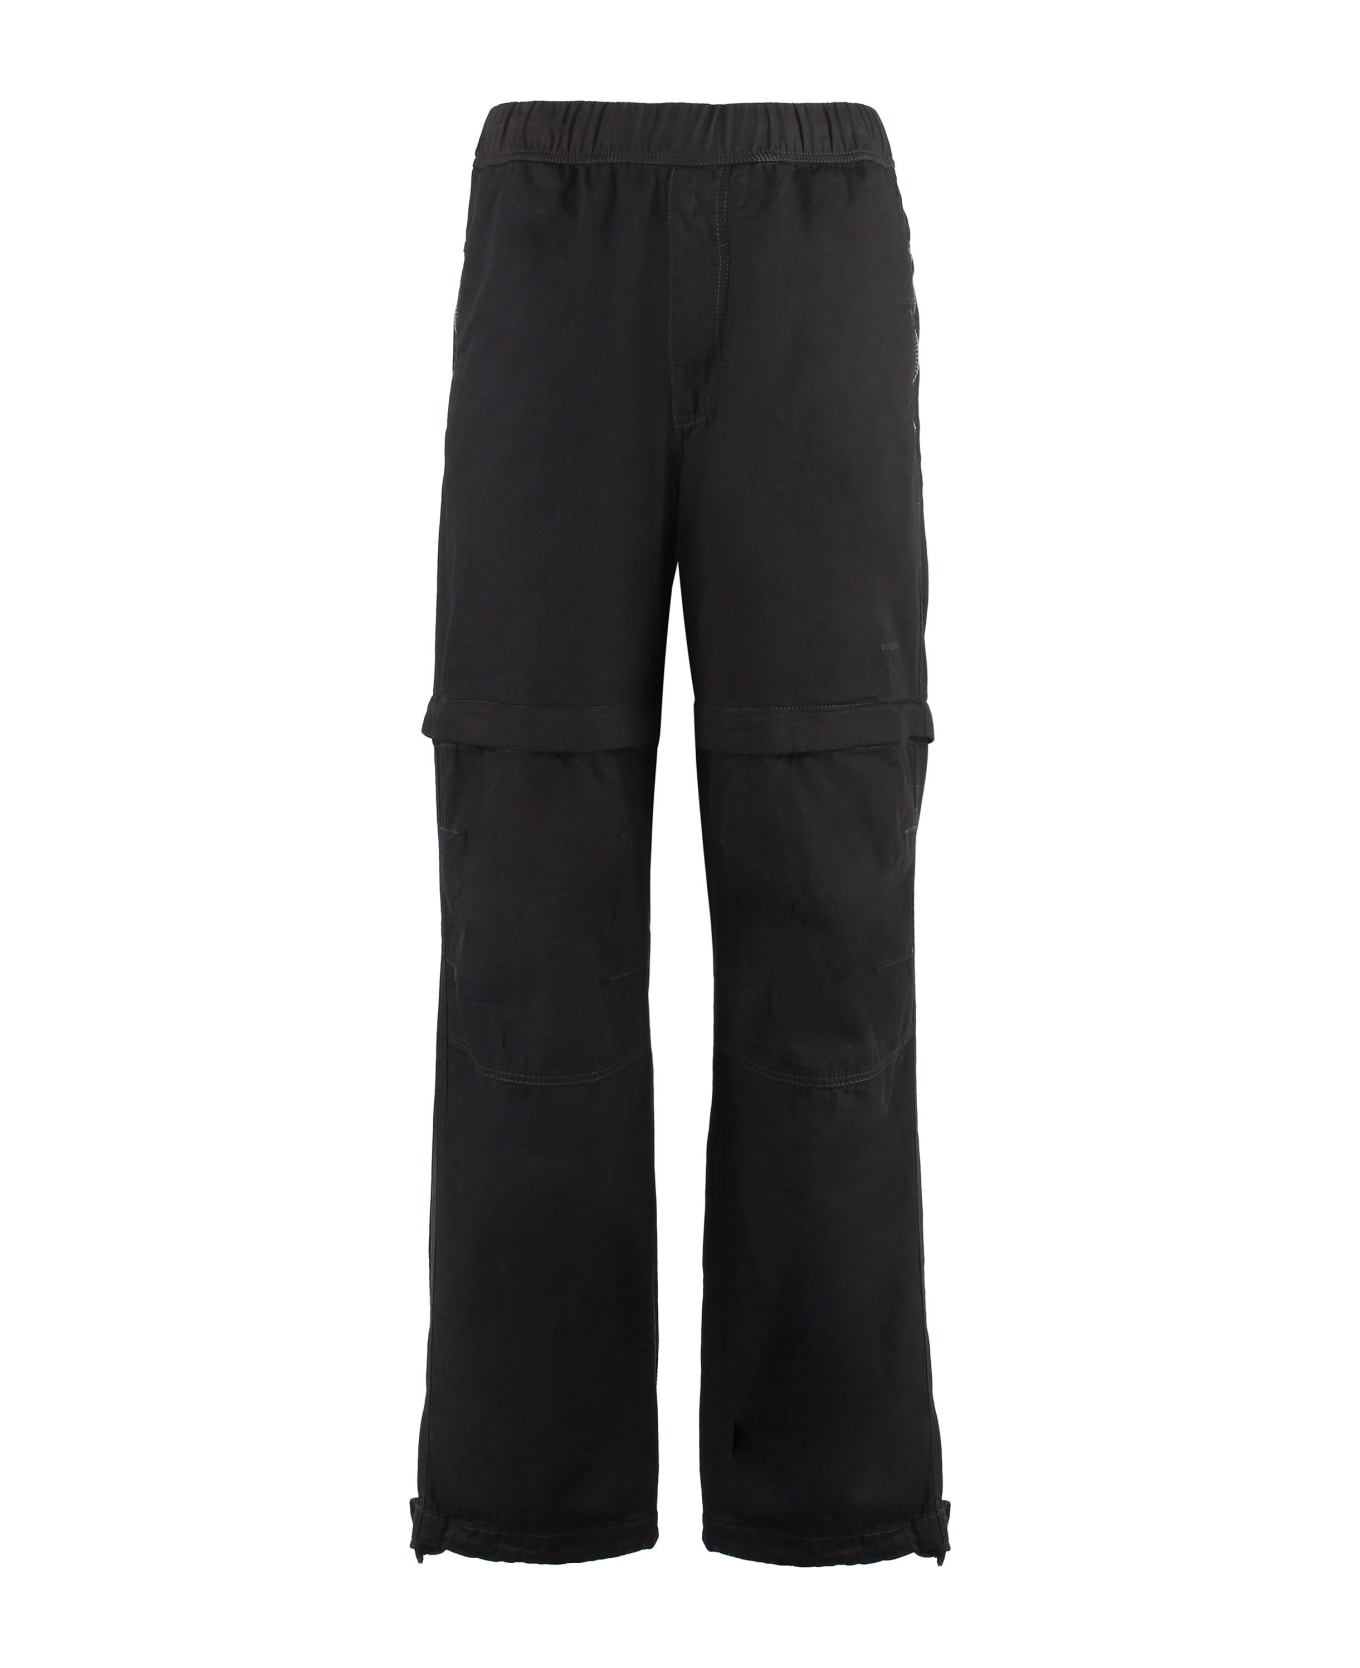 Givenchy Cotton Trousers - black ボトムス